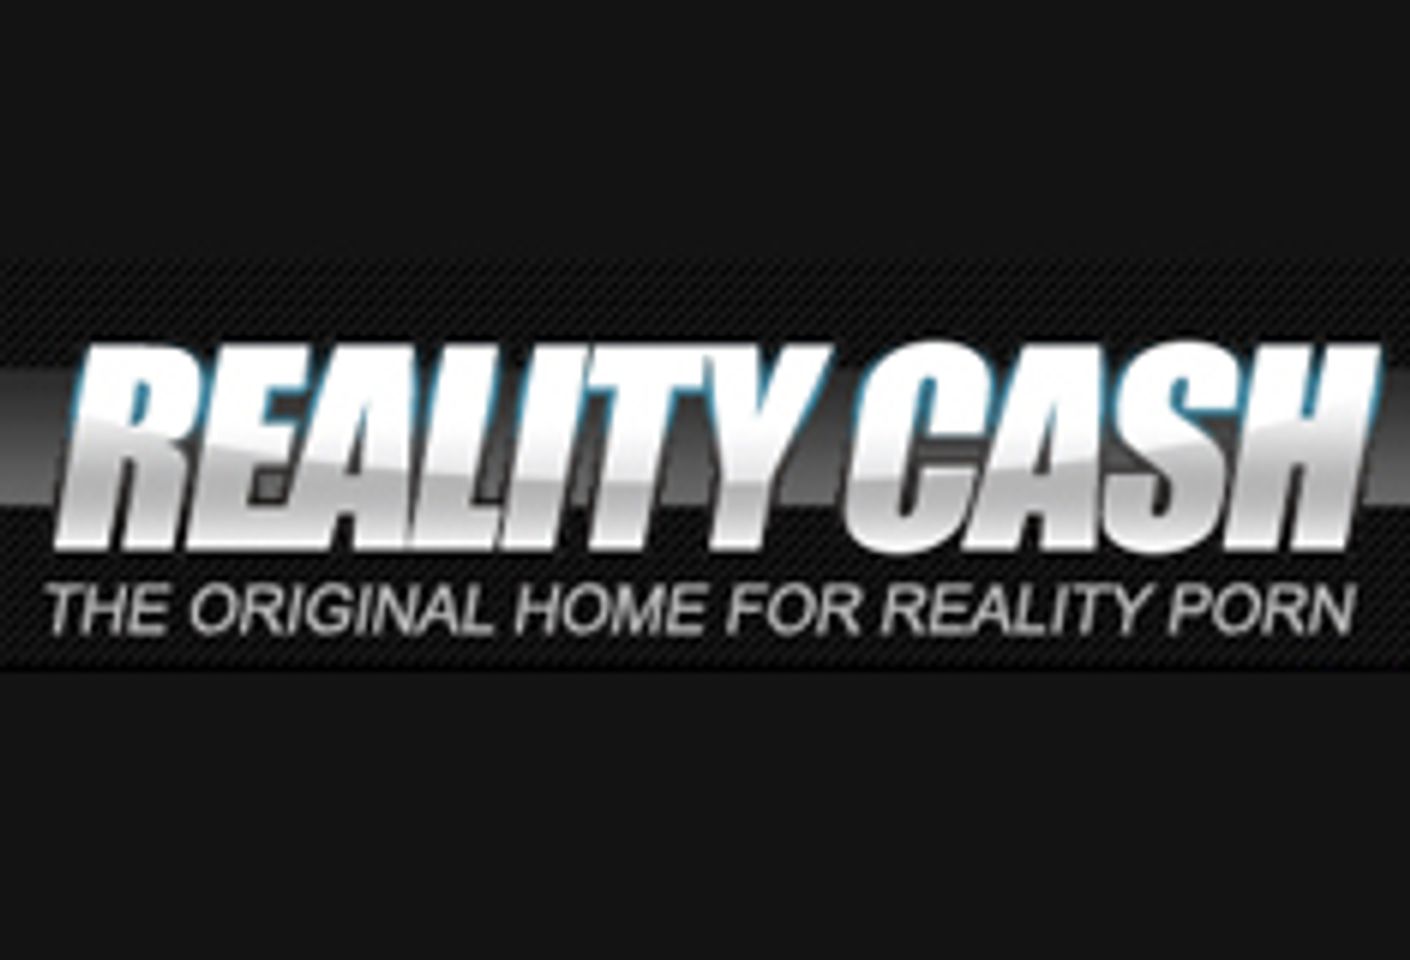 RealityCash Extends April Promotion Through May 7